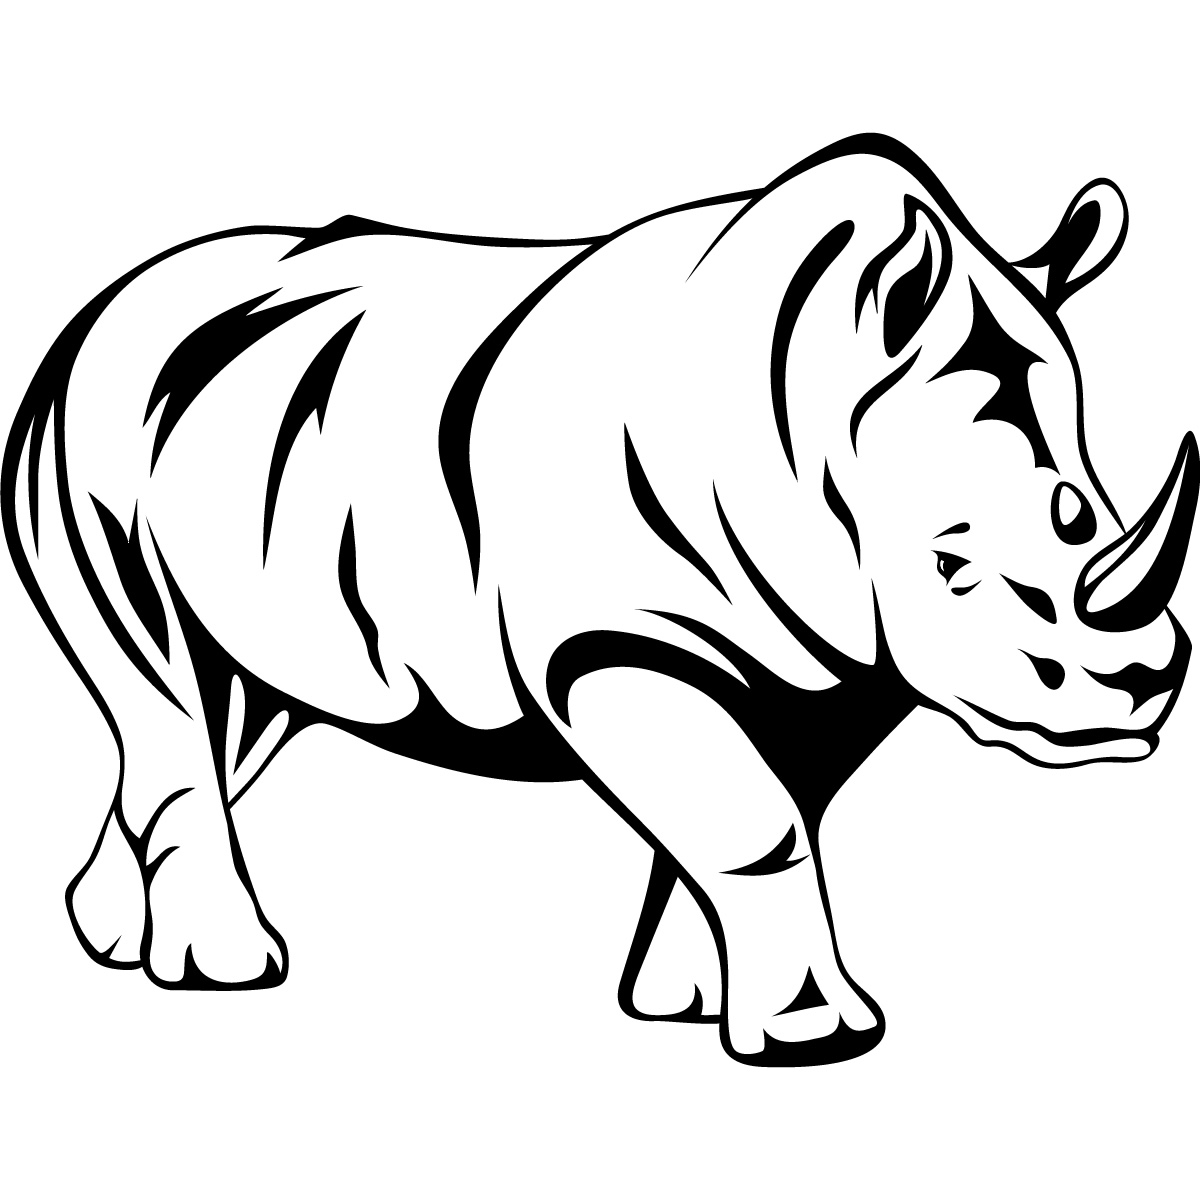 Outline Drawings Of Animals 